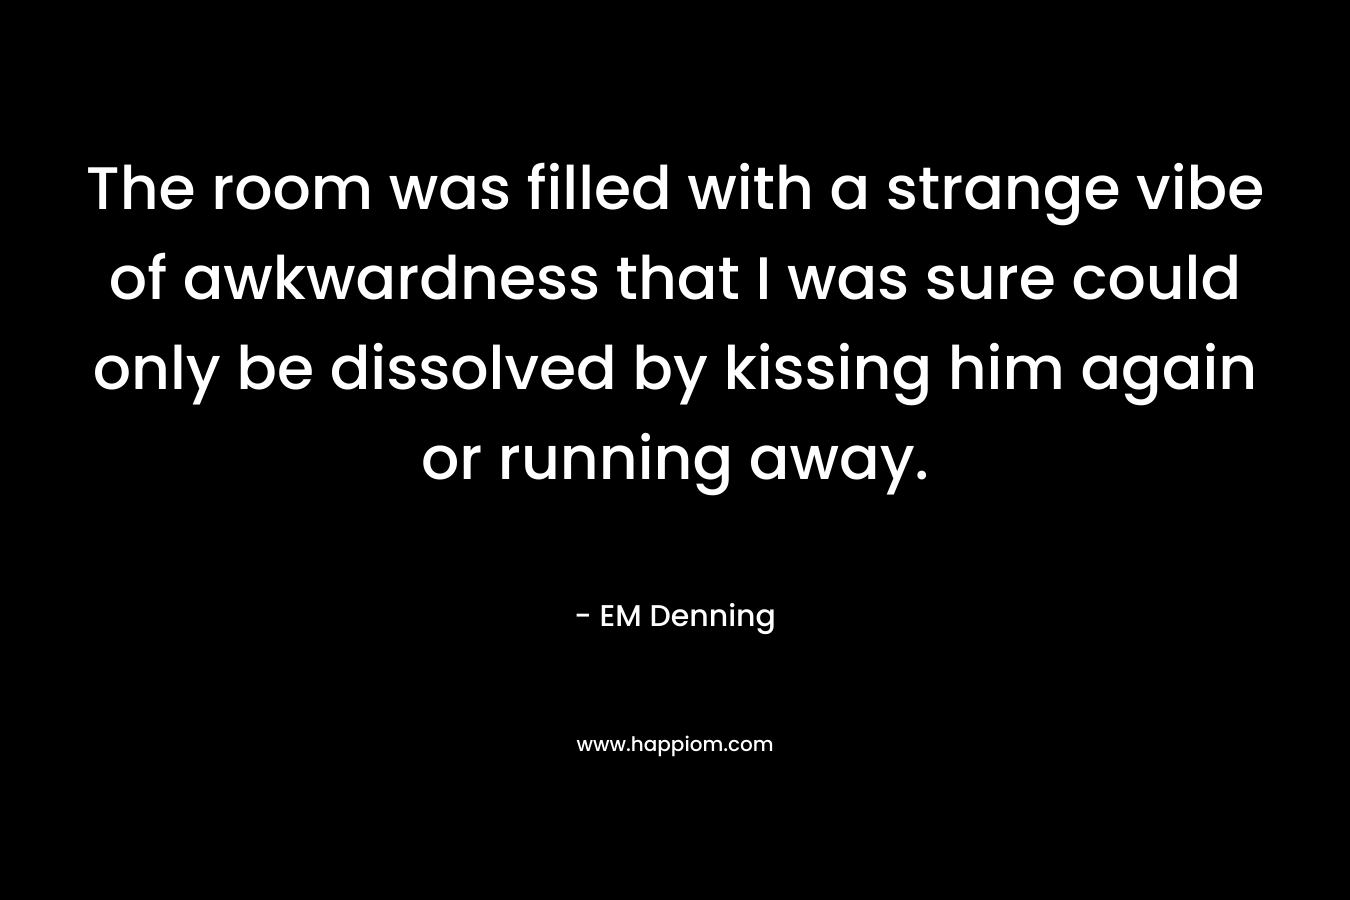 The room was filled with a strange vibe of awkwardness that I was sure could only be dissolved by kissing him again or running away. – EM Denning